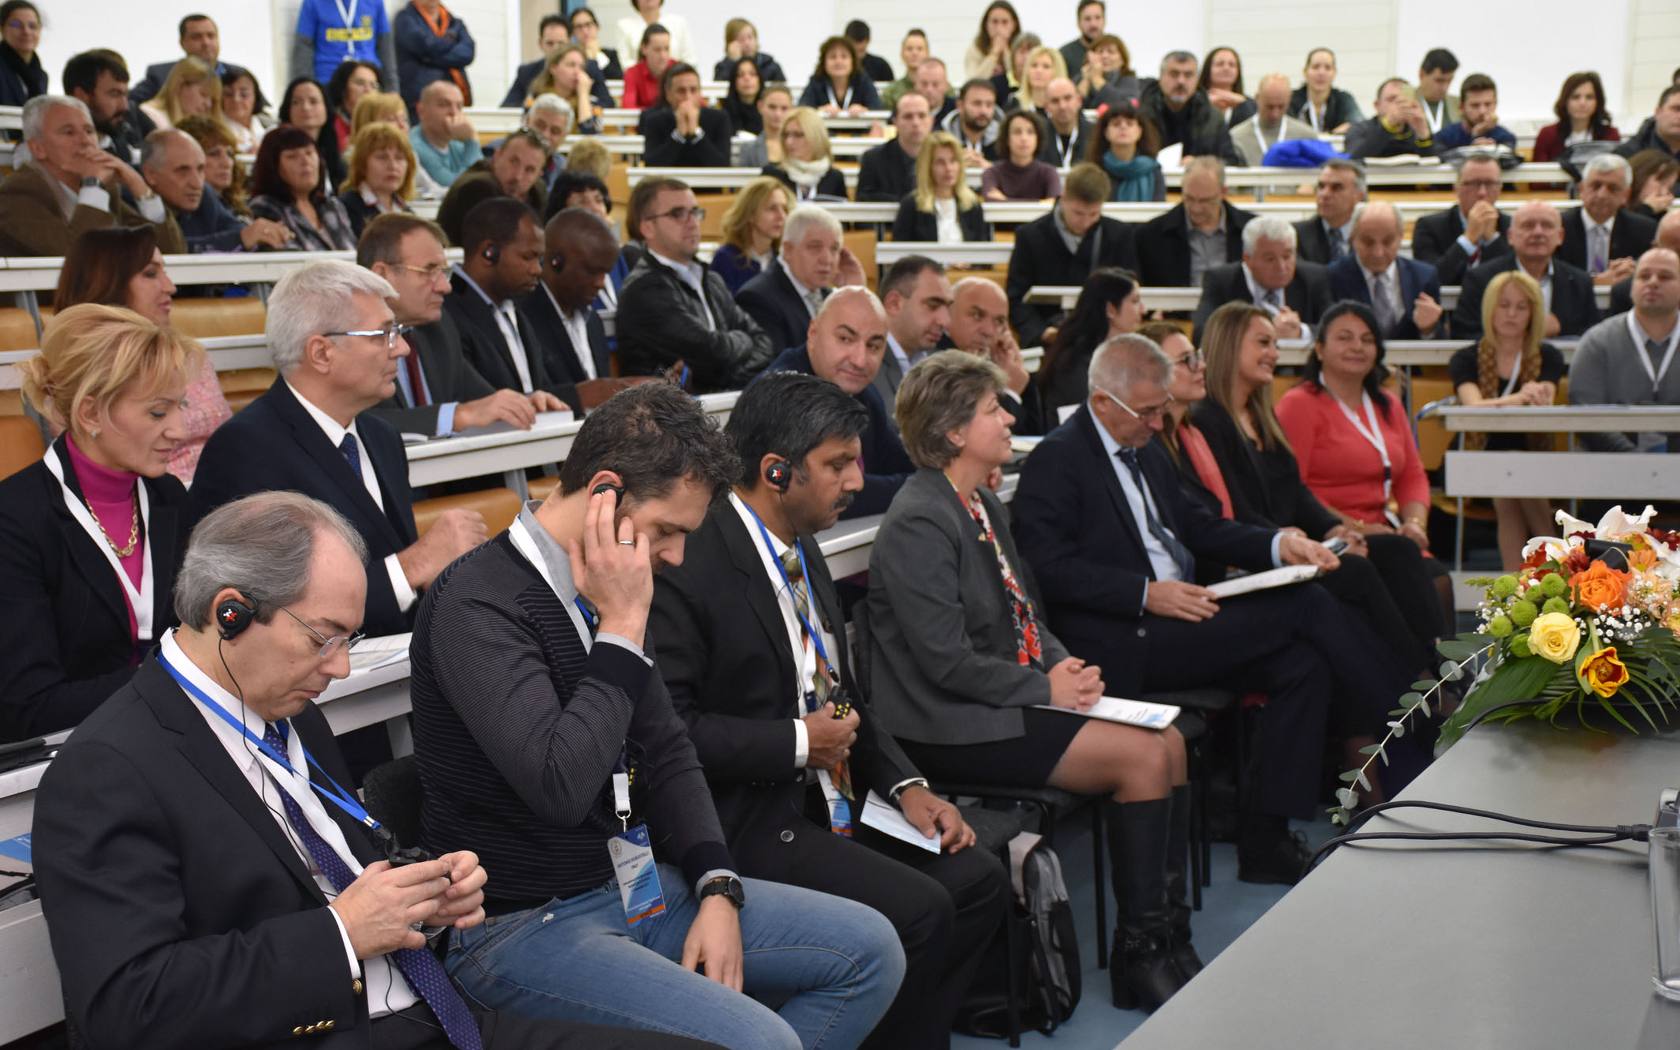 Delegates at the International Congress of Applied Sports Sciences, Sofia